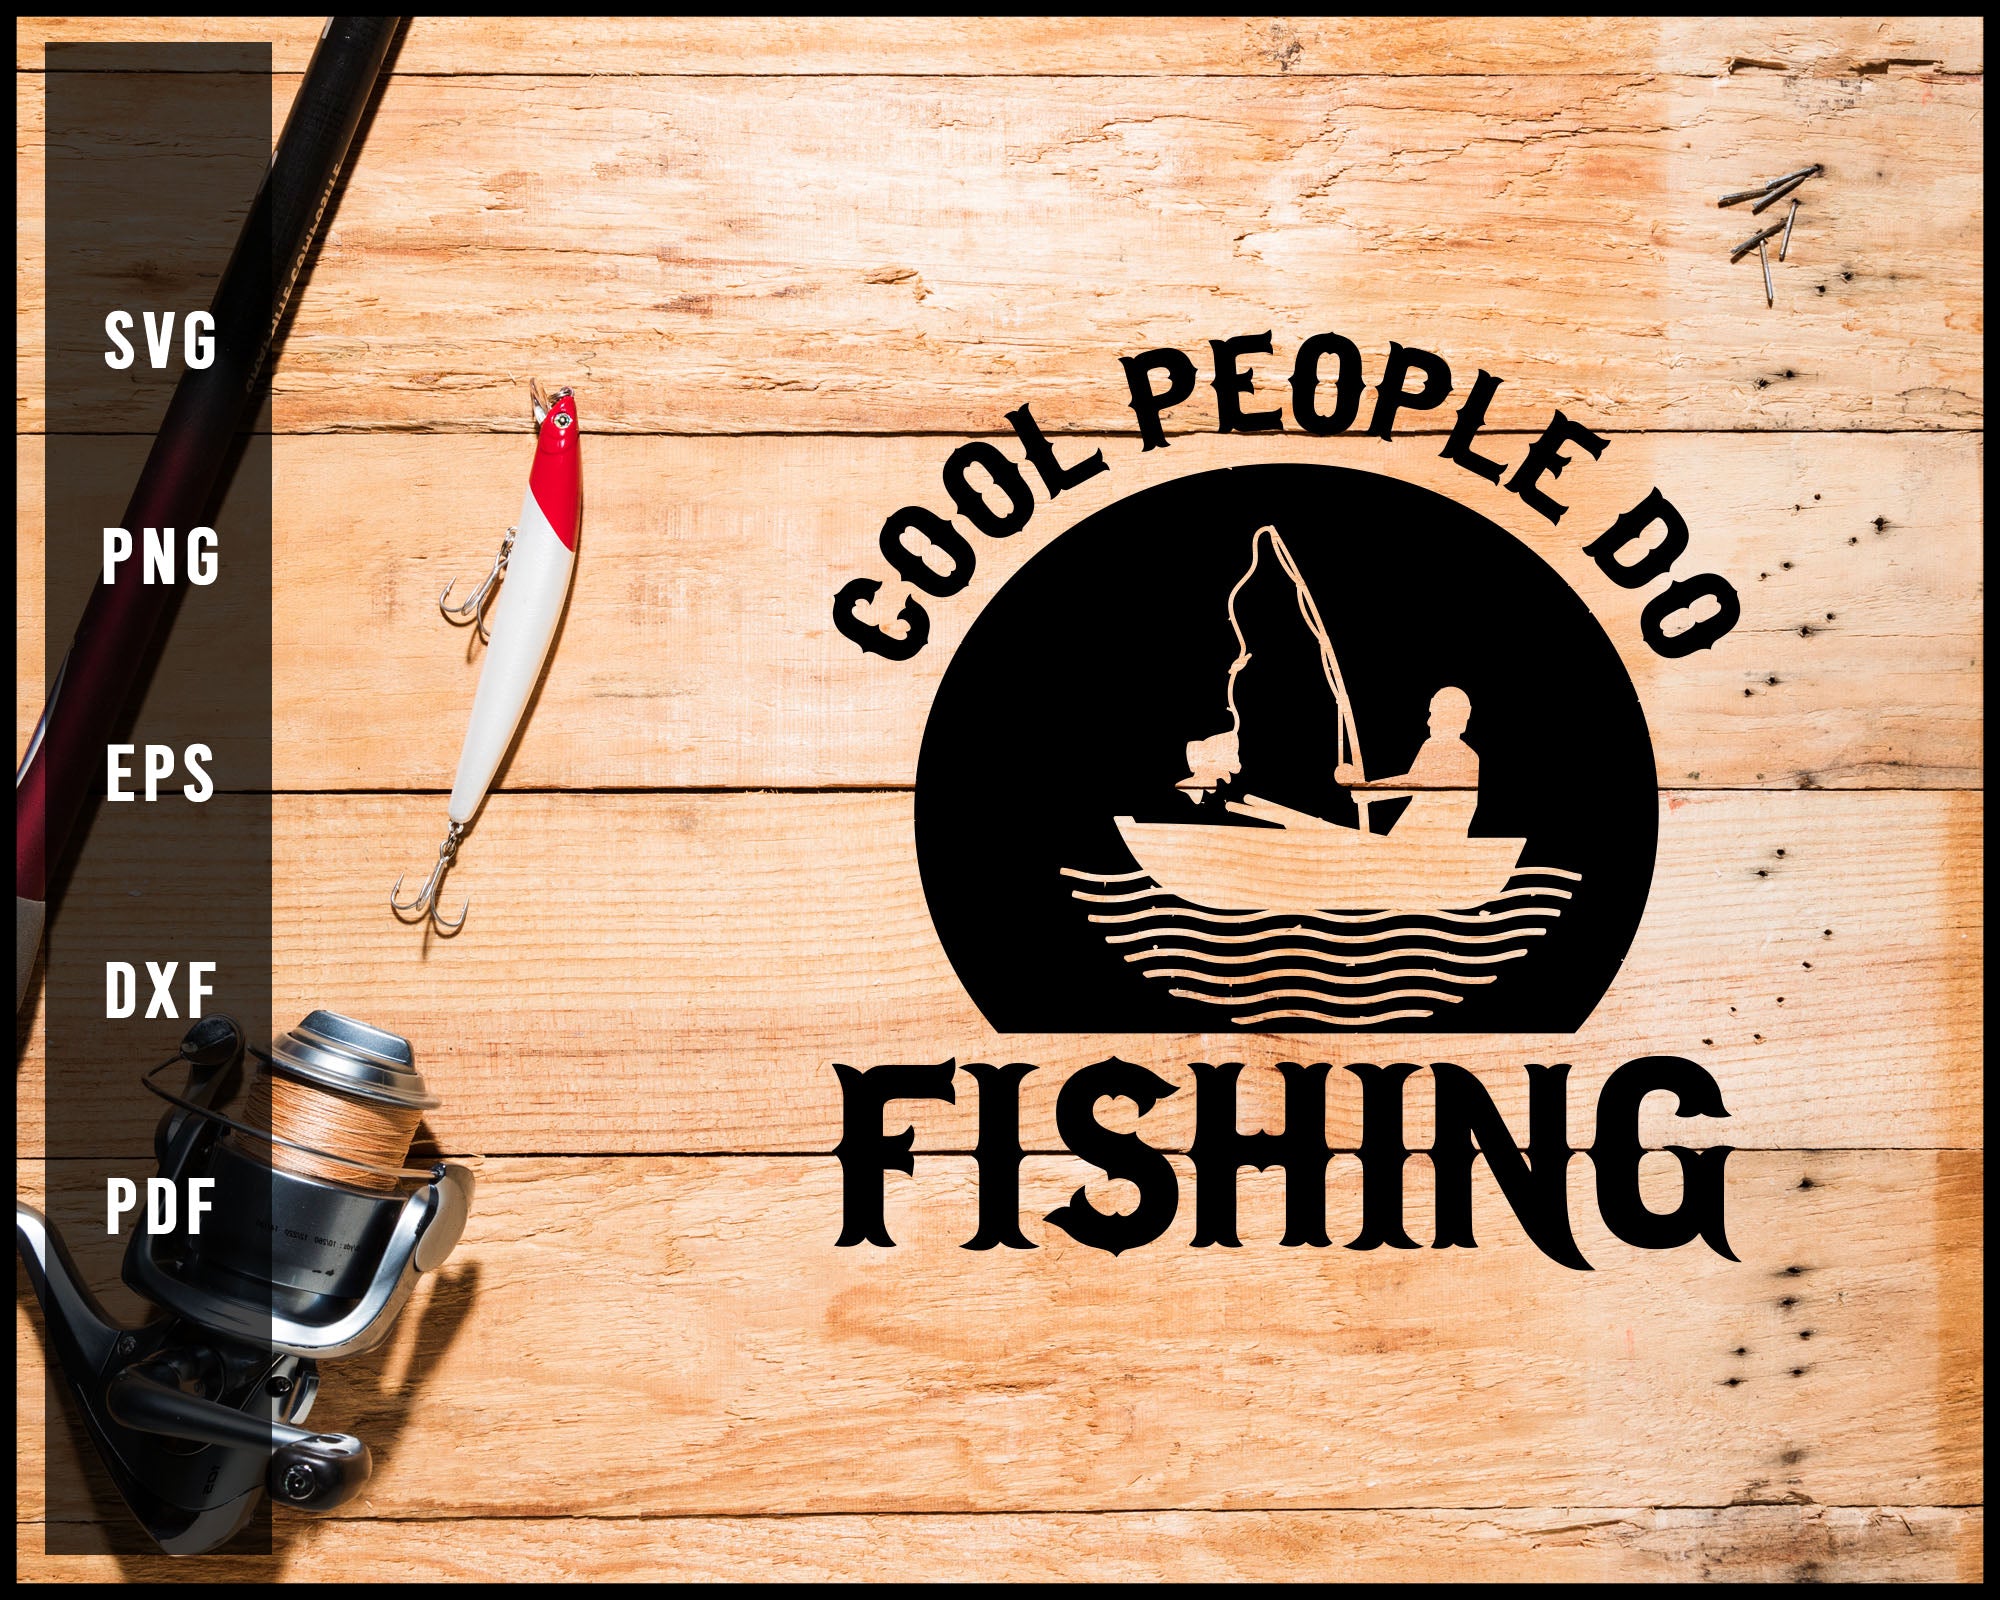 Cool People Do Fishing svg png Silhouette Designs For Cricut And Printable Files